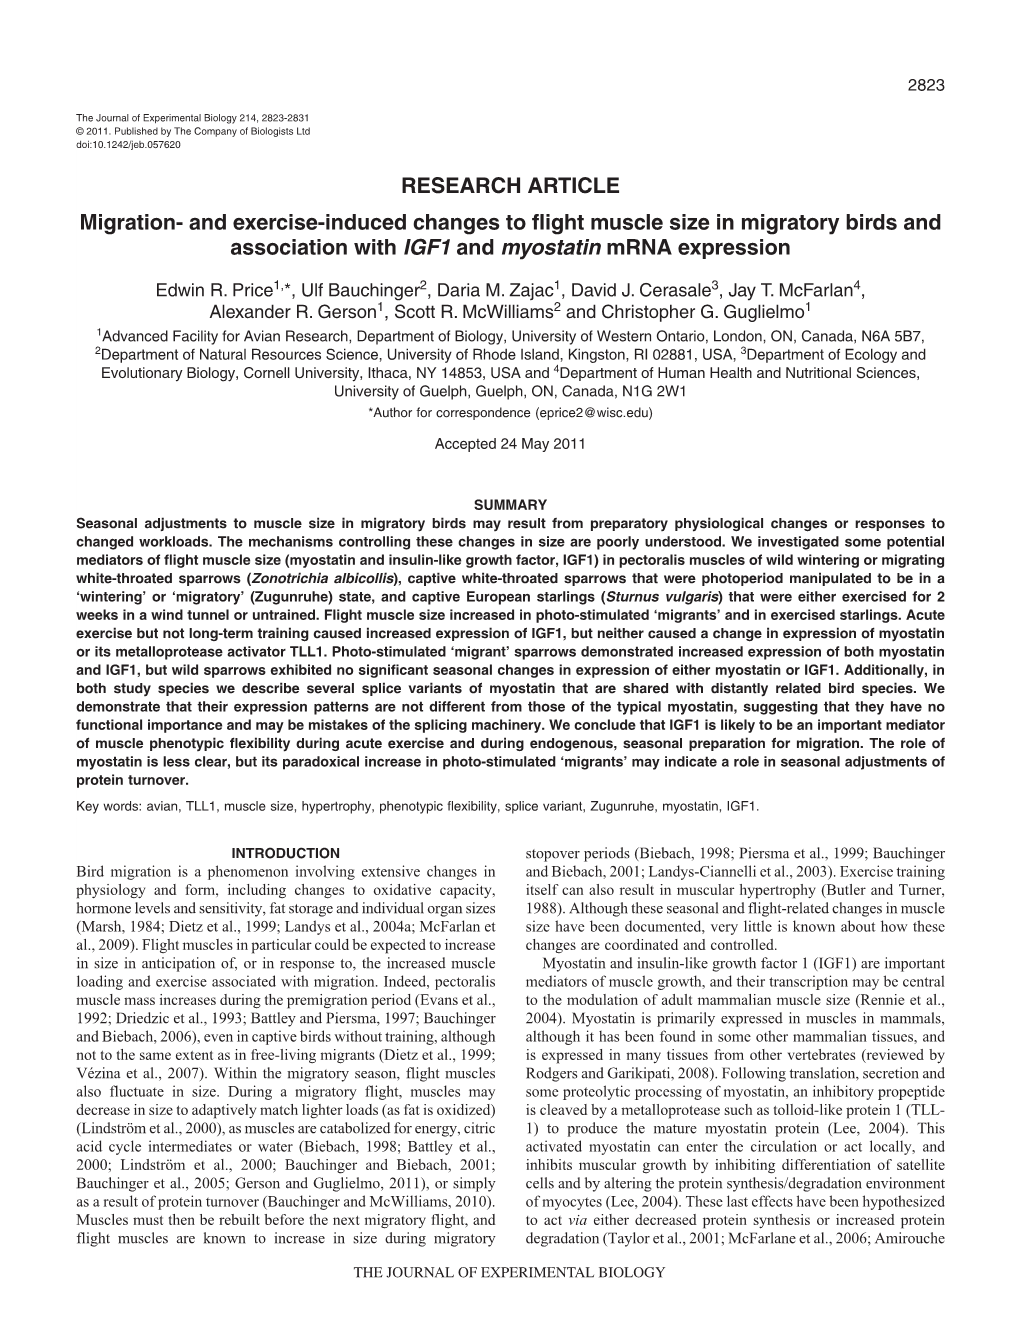 RESEARCH ARTICLE Migration- and Exercise-Induced Changes to Flight Muscle Size in Migratory Birds and Association with IGF1 and Myostatin Mrna Expression